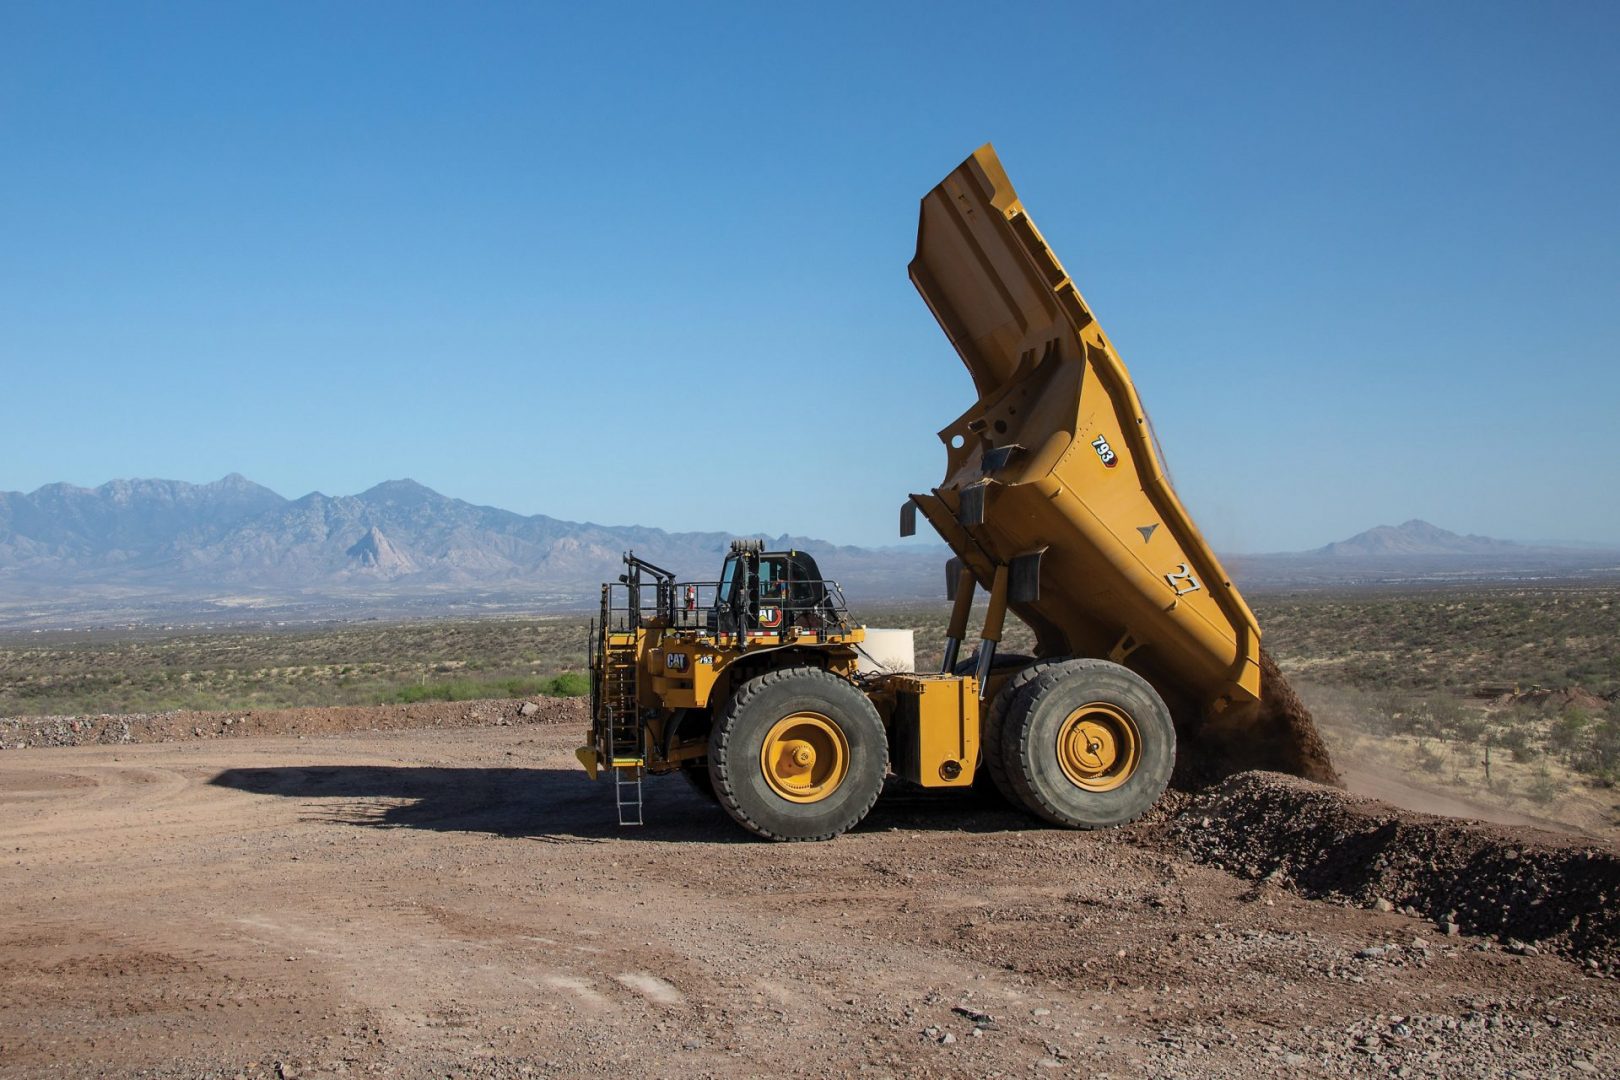 Cat 793 truck boasts highest payload in its size class